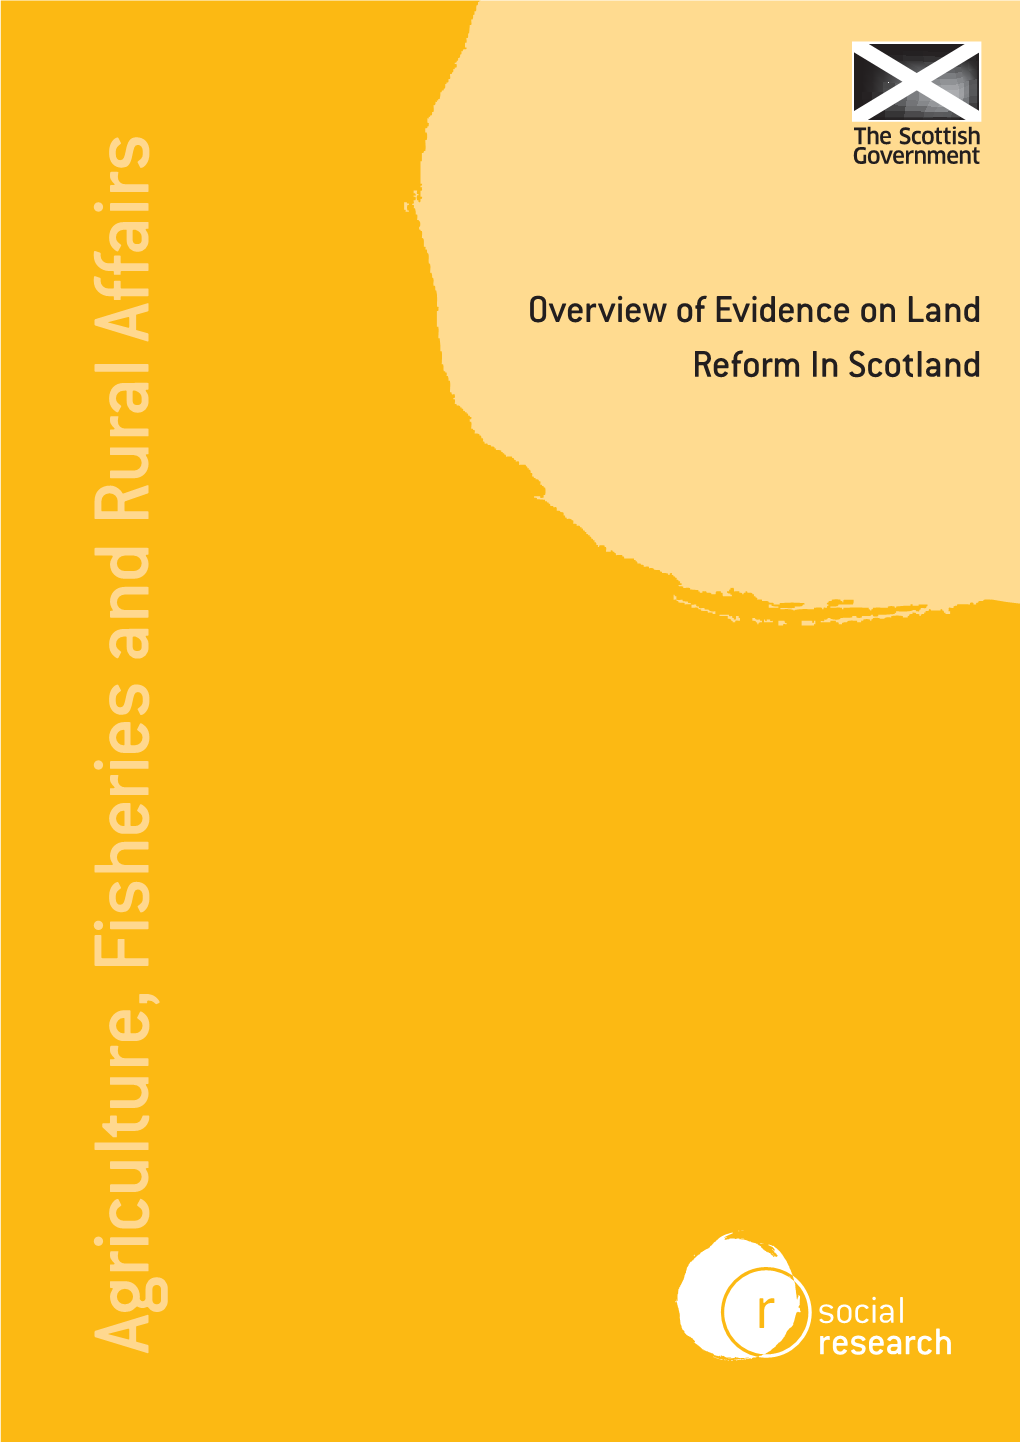 Overview of Evidence on Land Reform in Scotland